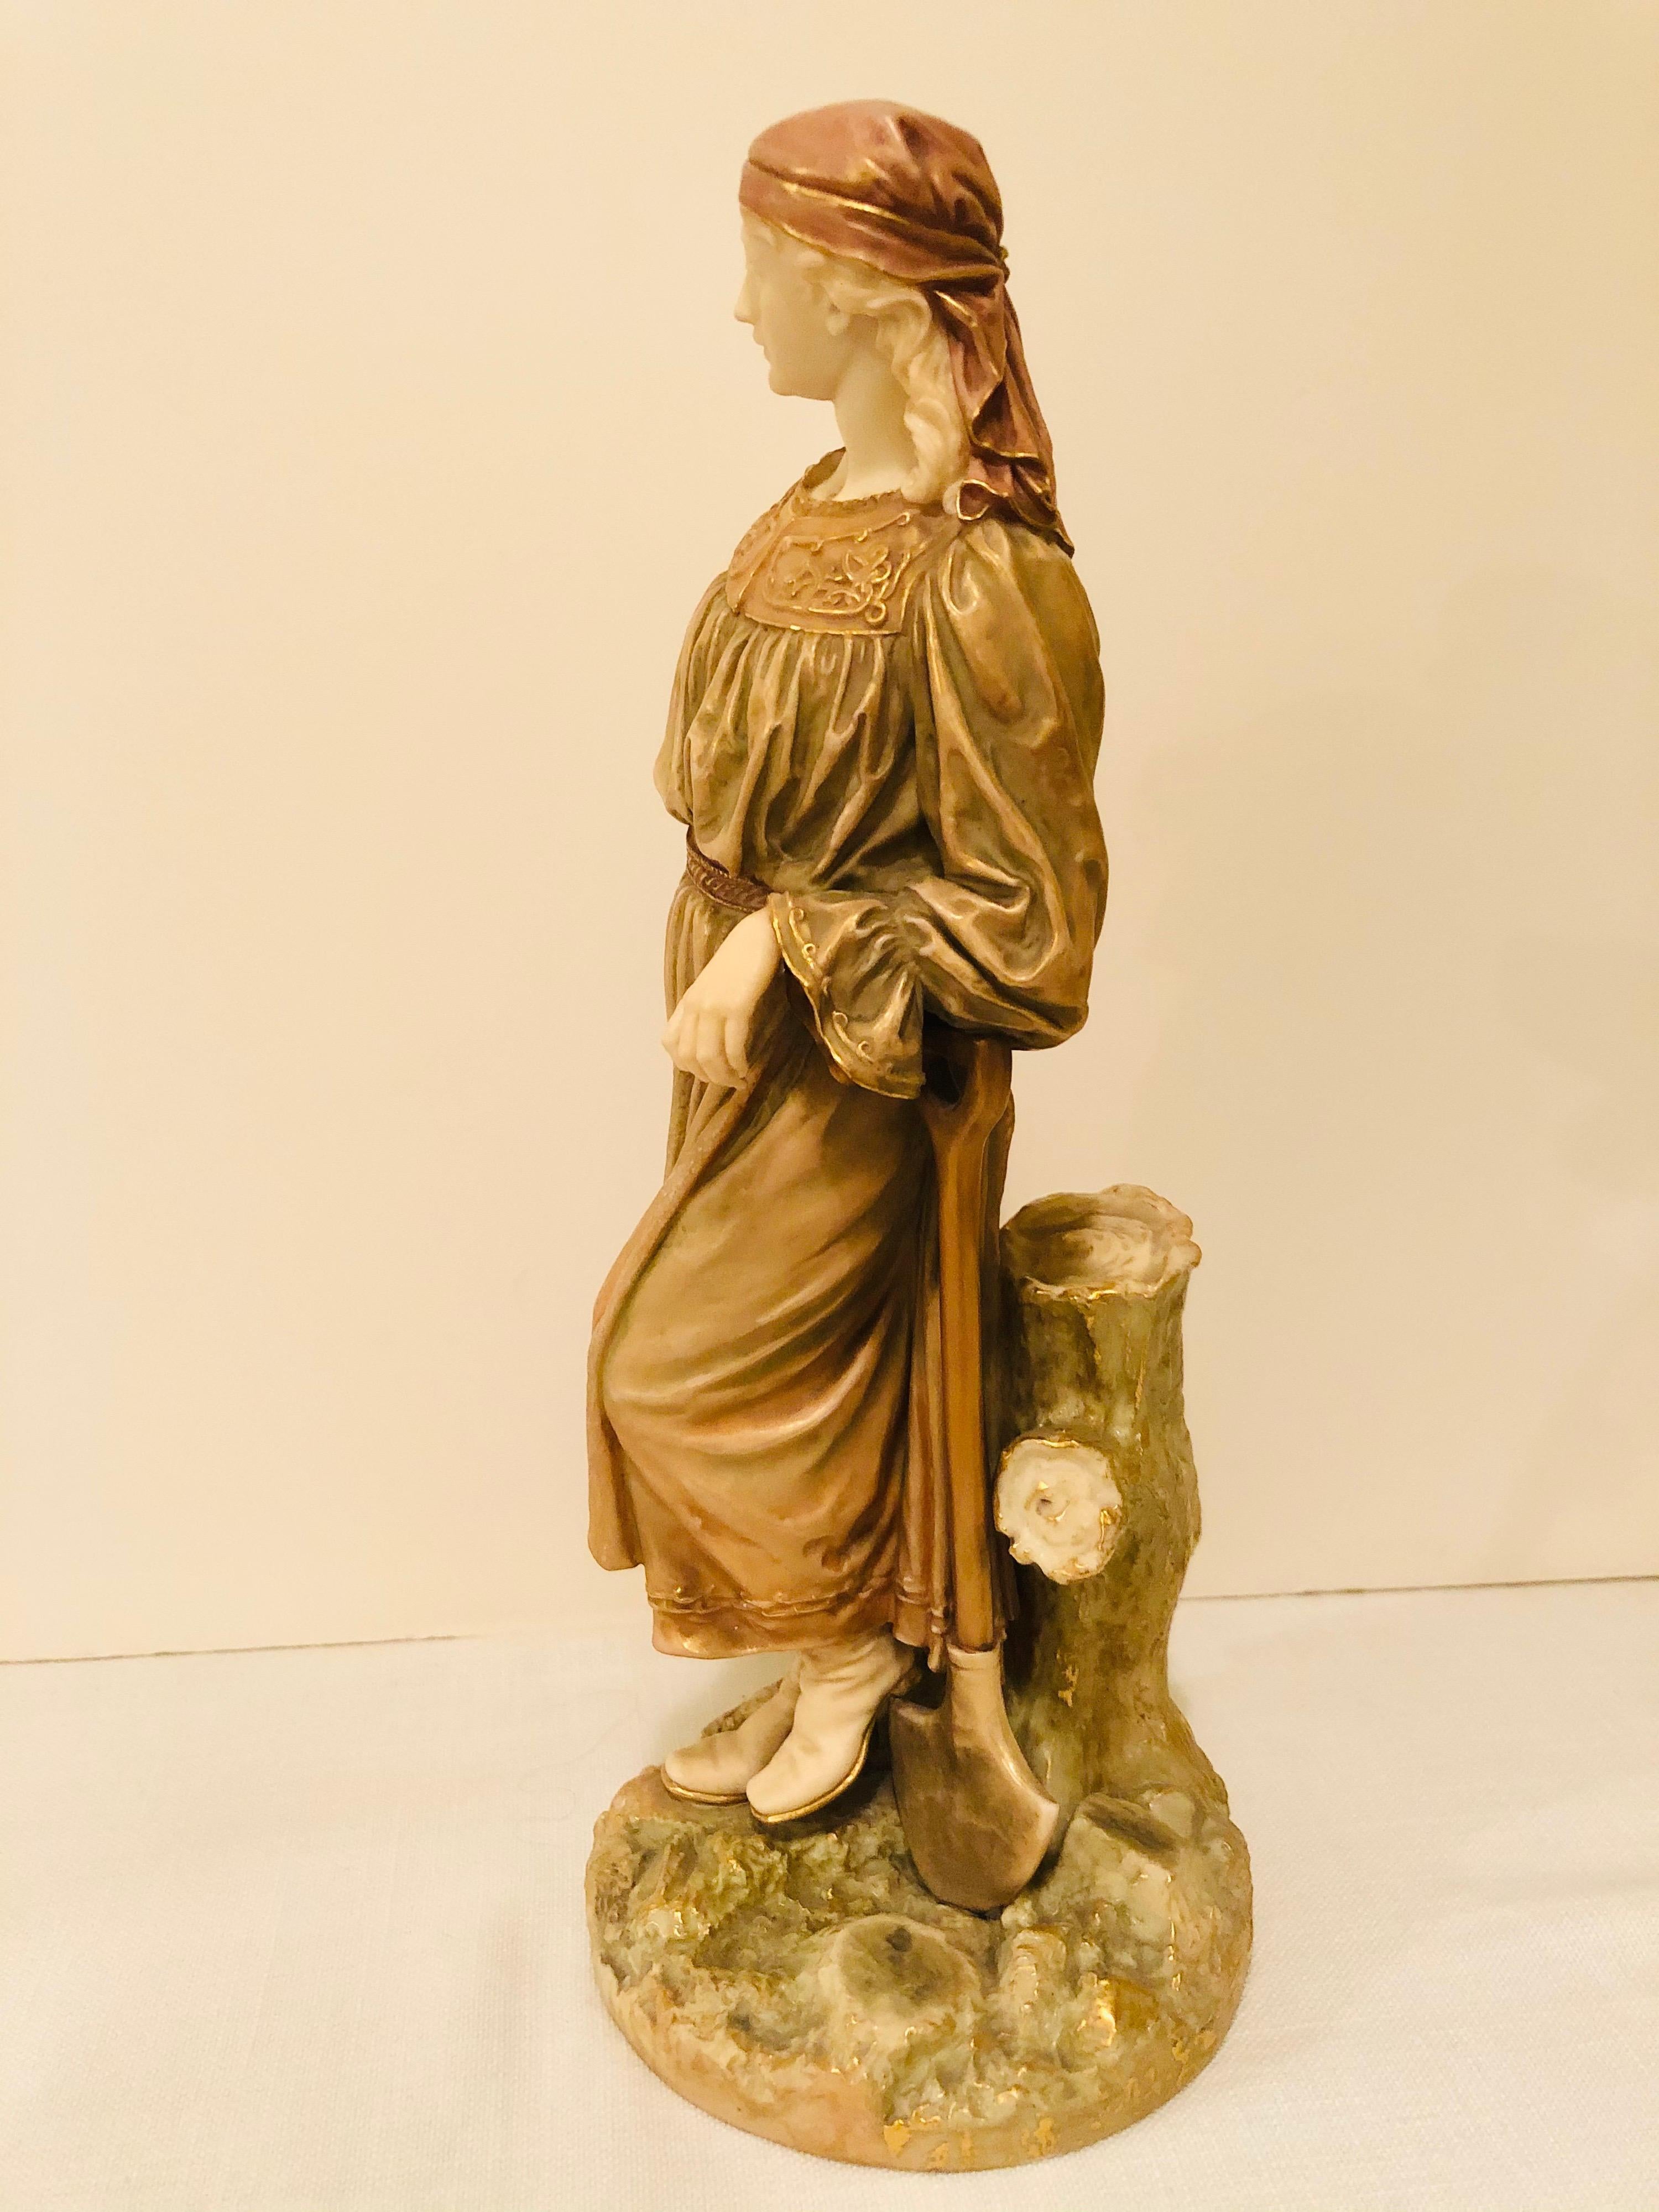 English Royal Worcester Figure of a Lady Gardener Wearing a Flowing Dress and Hat